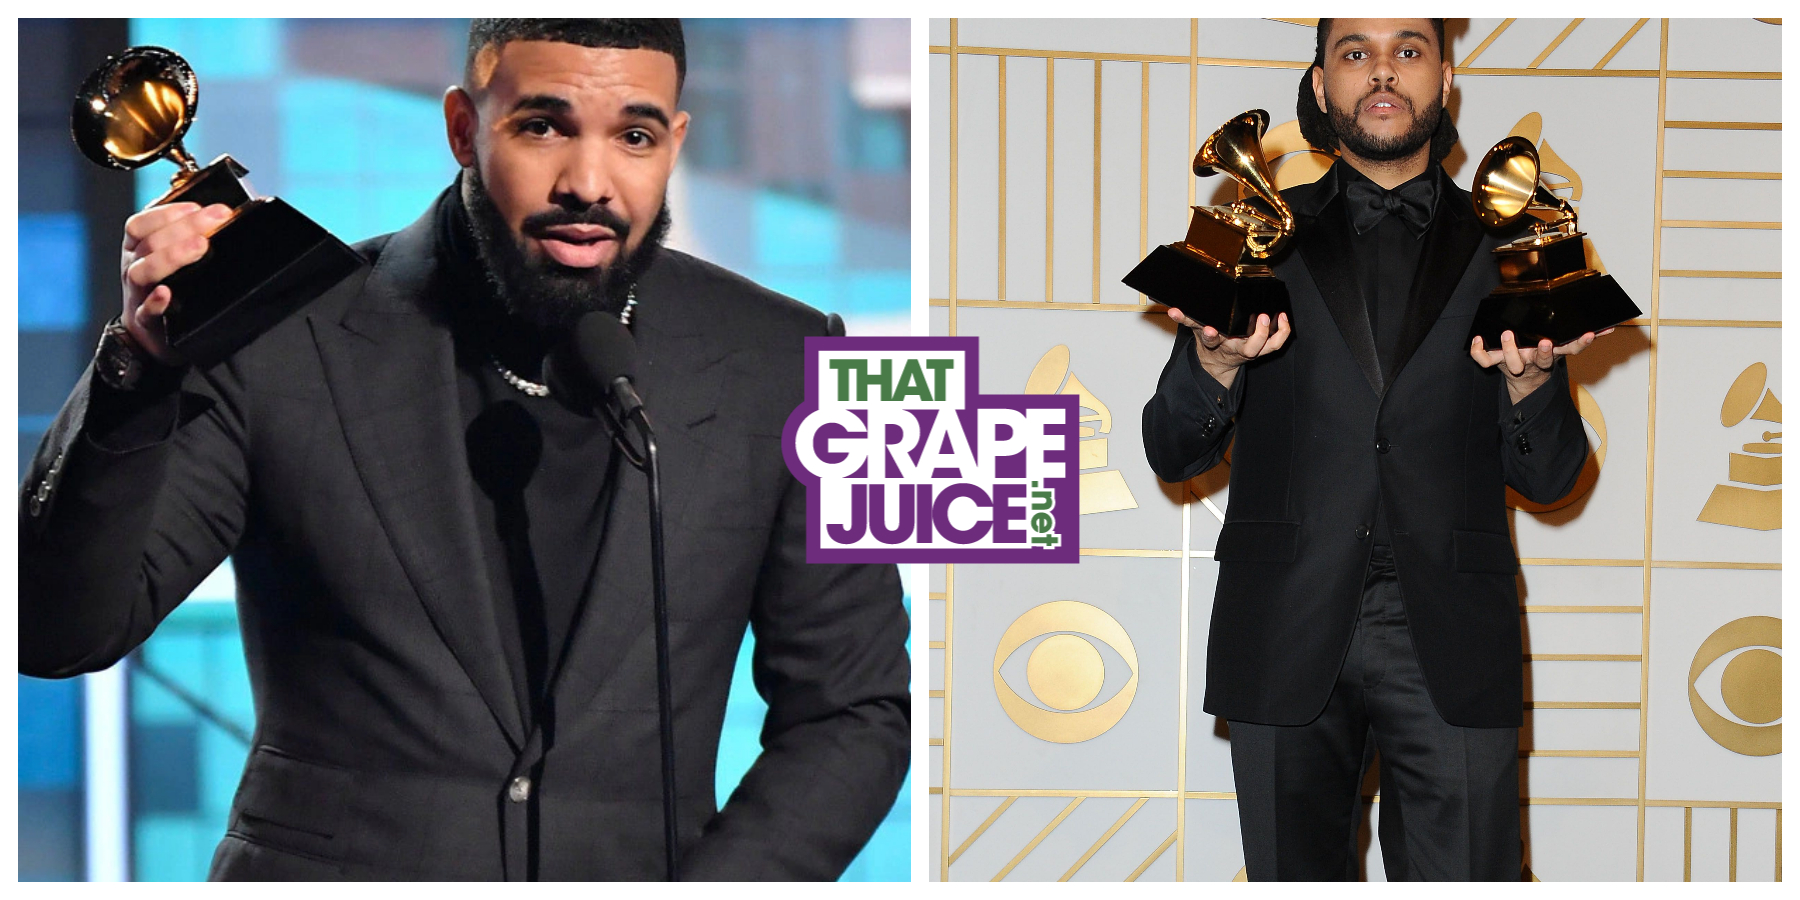 Did You Miss It? Drake & The Weeknd Snub GRAMMYs By Refusing To Submit Their Solo Music For Consideration